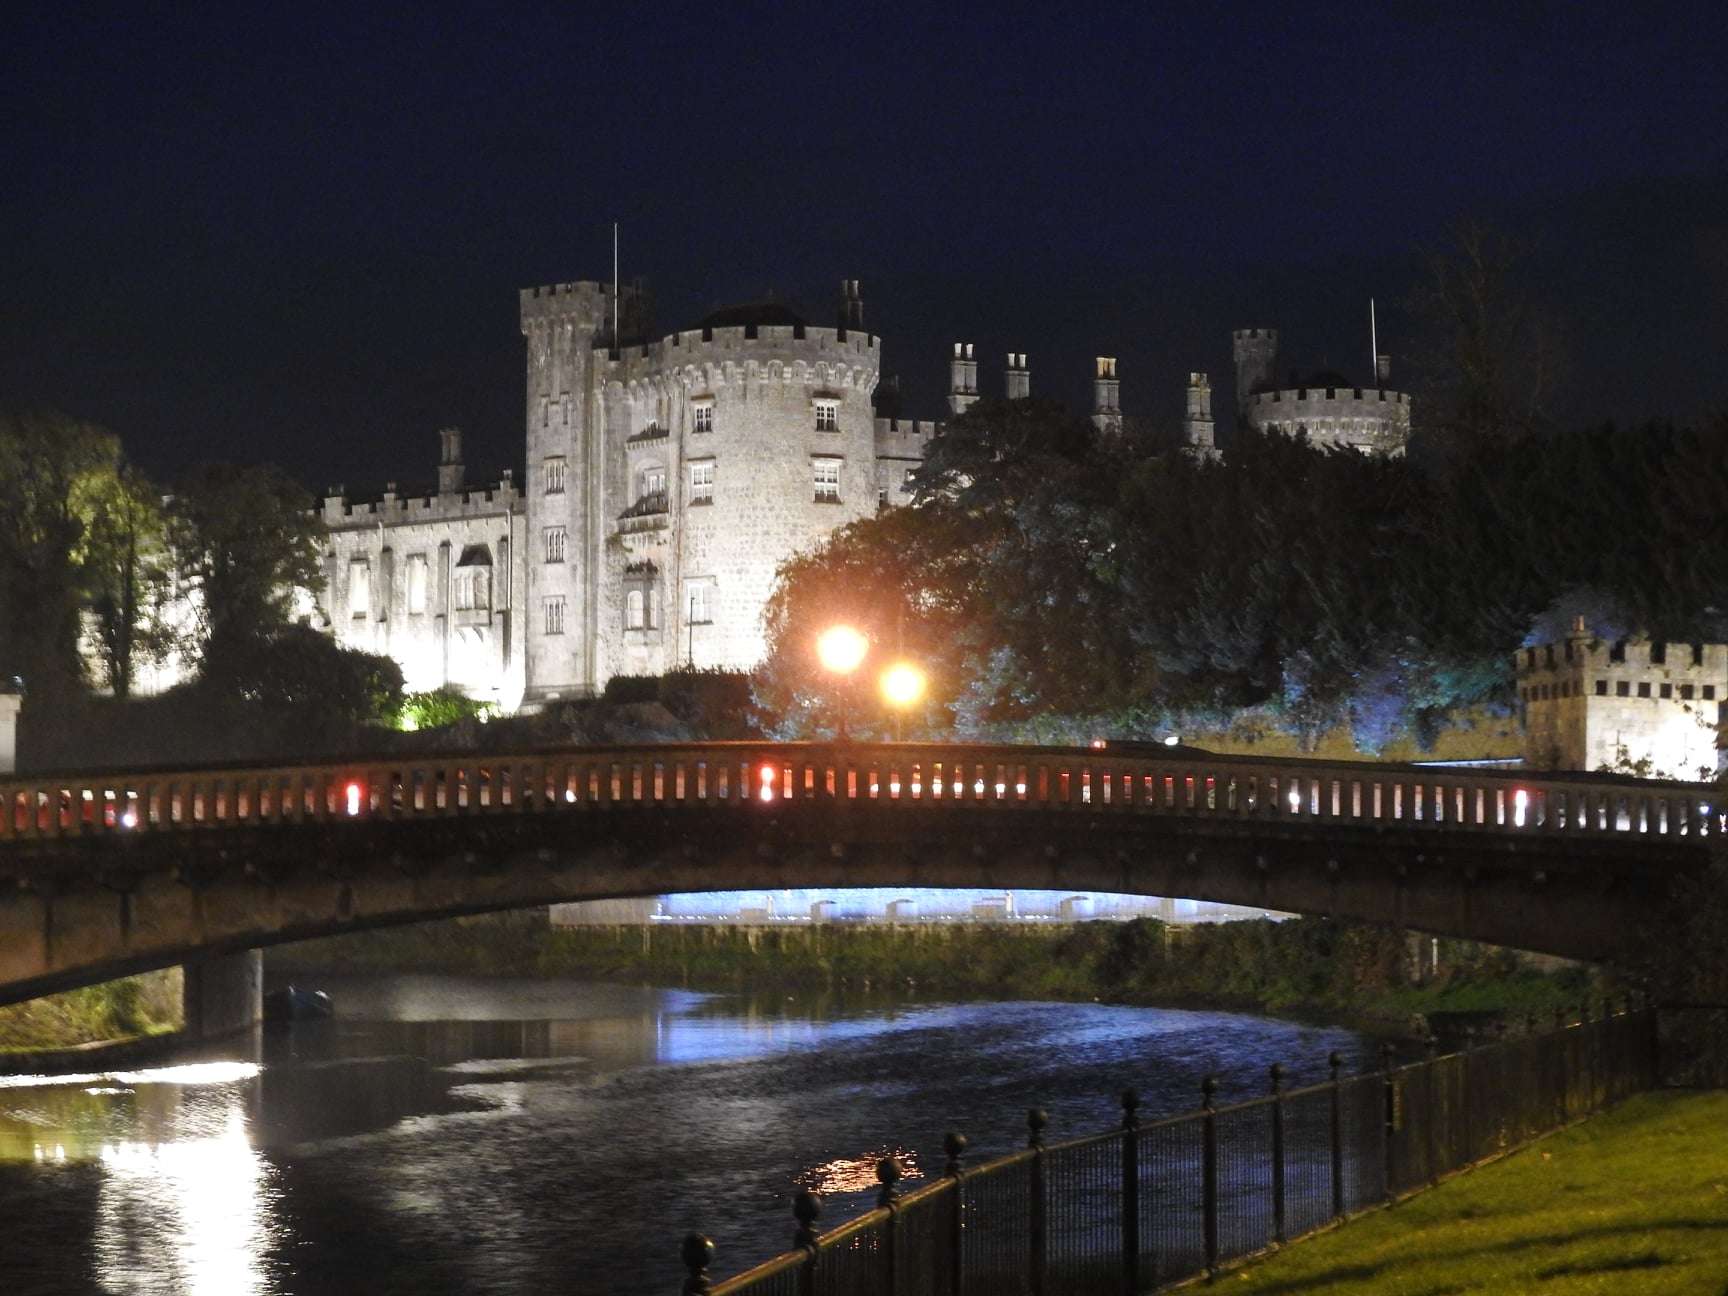 View of Kilkenny Castle at night